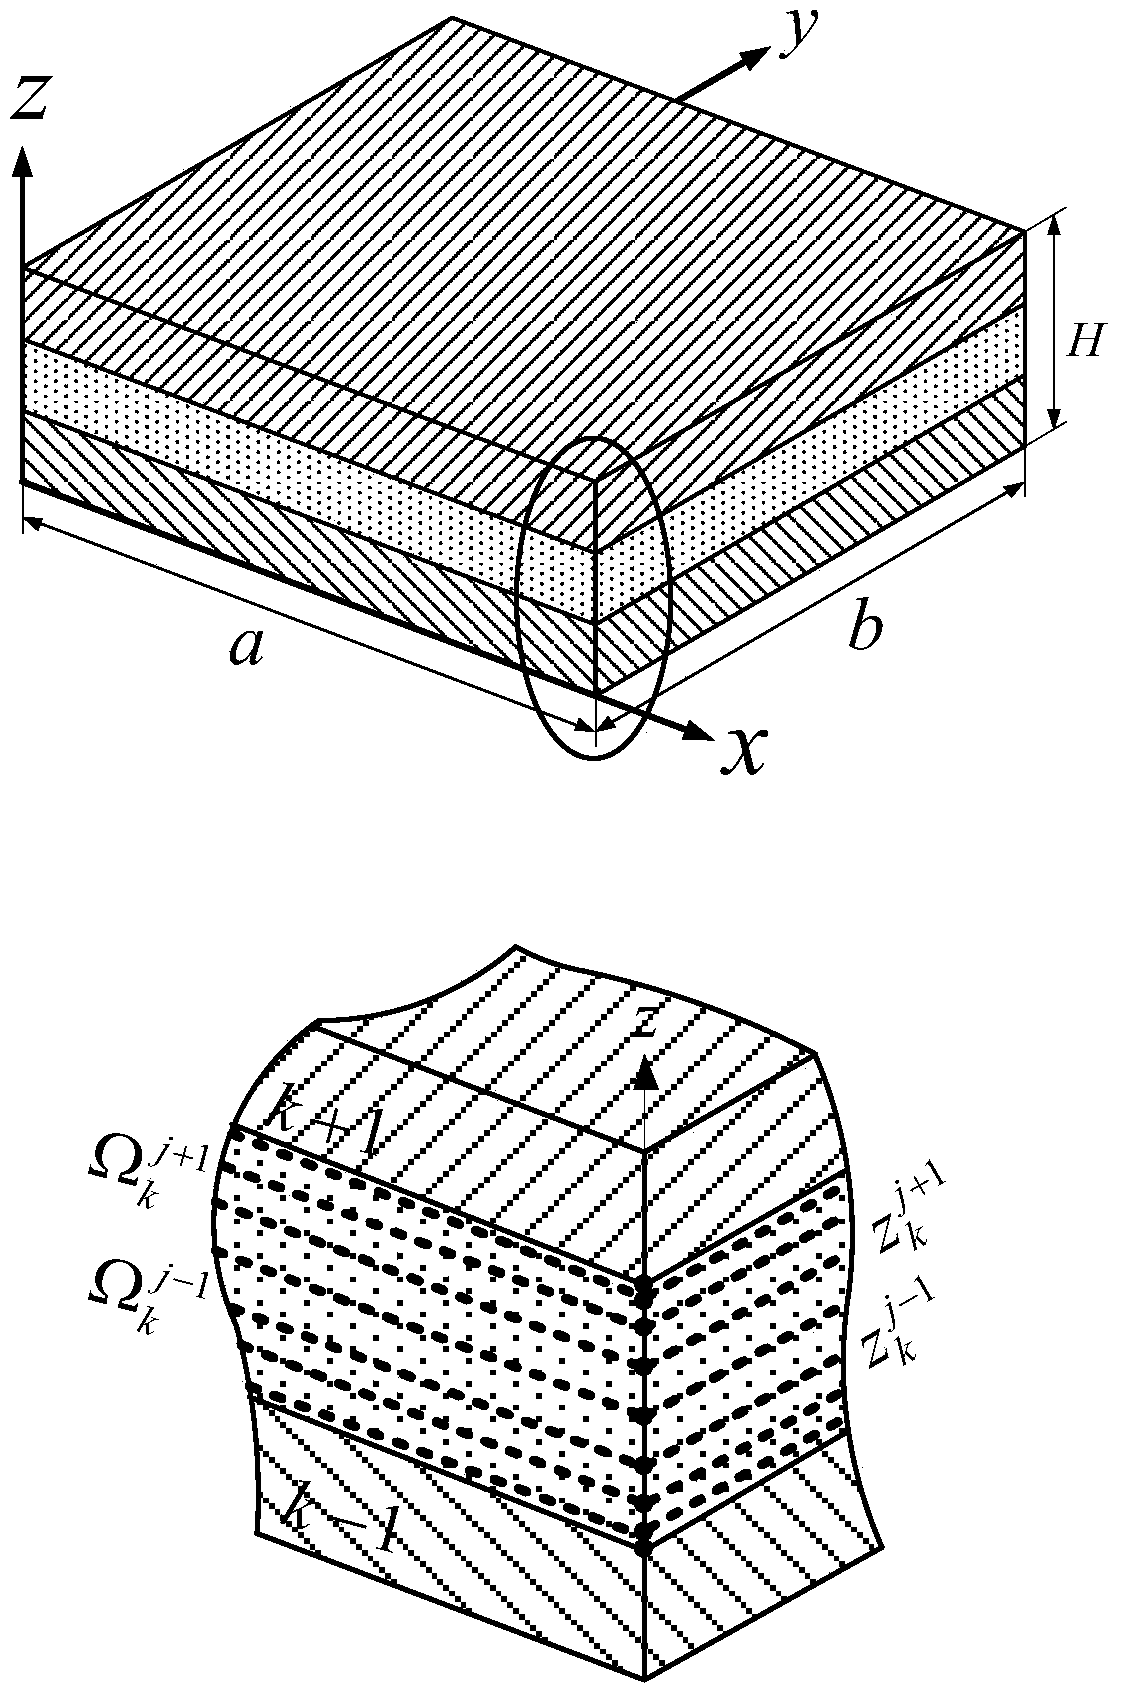 A three-dimensional vibration analysis method for composite laminate structures